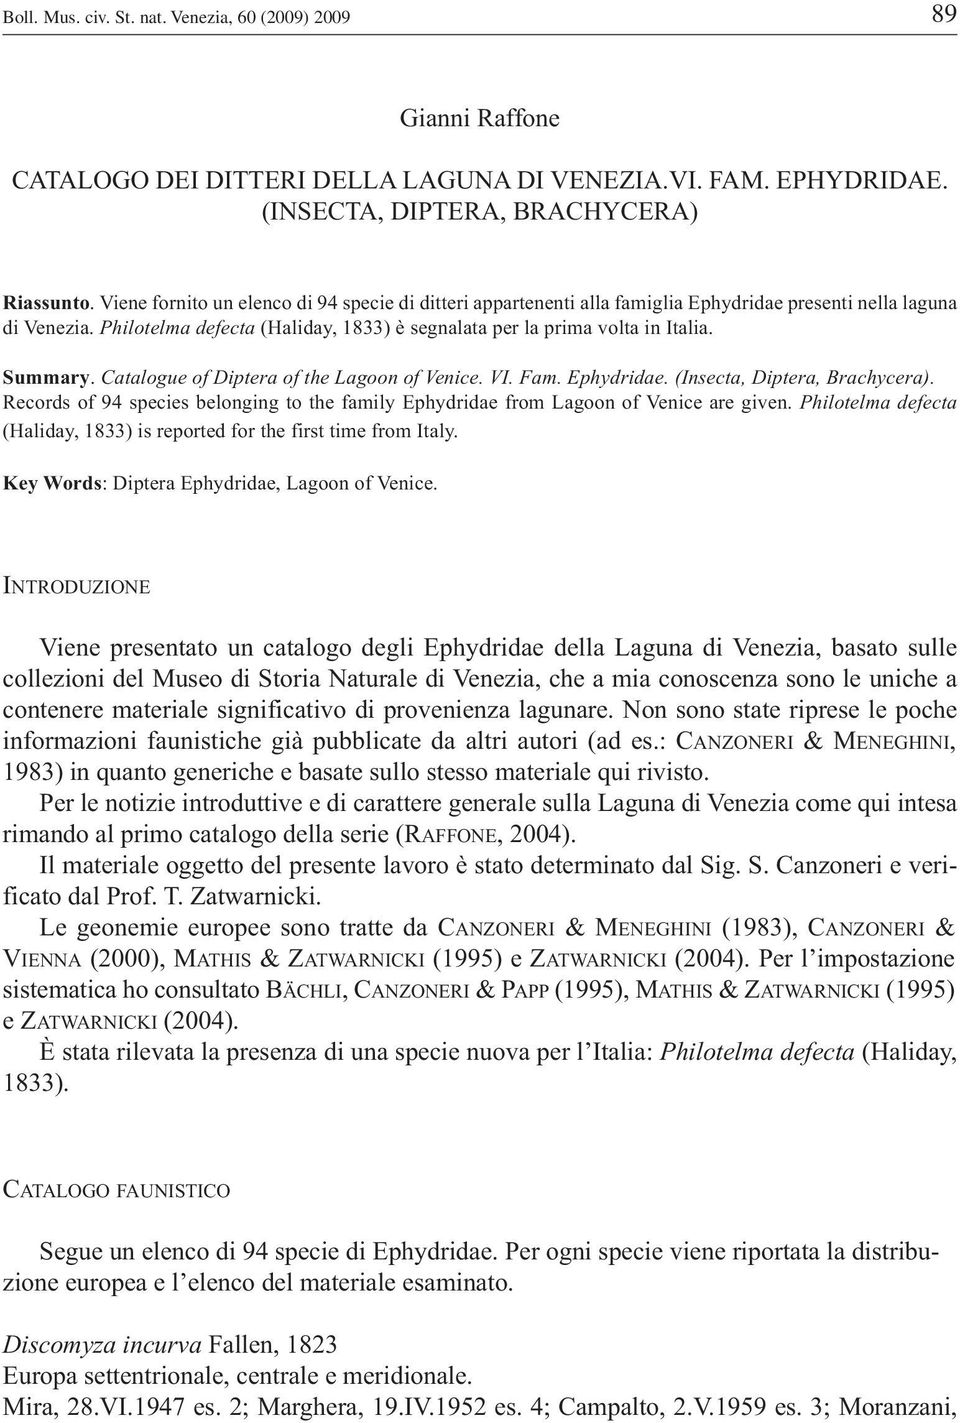 Summary. Catalogue of Diptera of the Lagoon of Venice. VI. Fam. Ephydridae. (Insecta, Diptera, Brachycera). Records of 94 species belonging to the family Ephydridae from Lagoon of Venice are given.